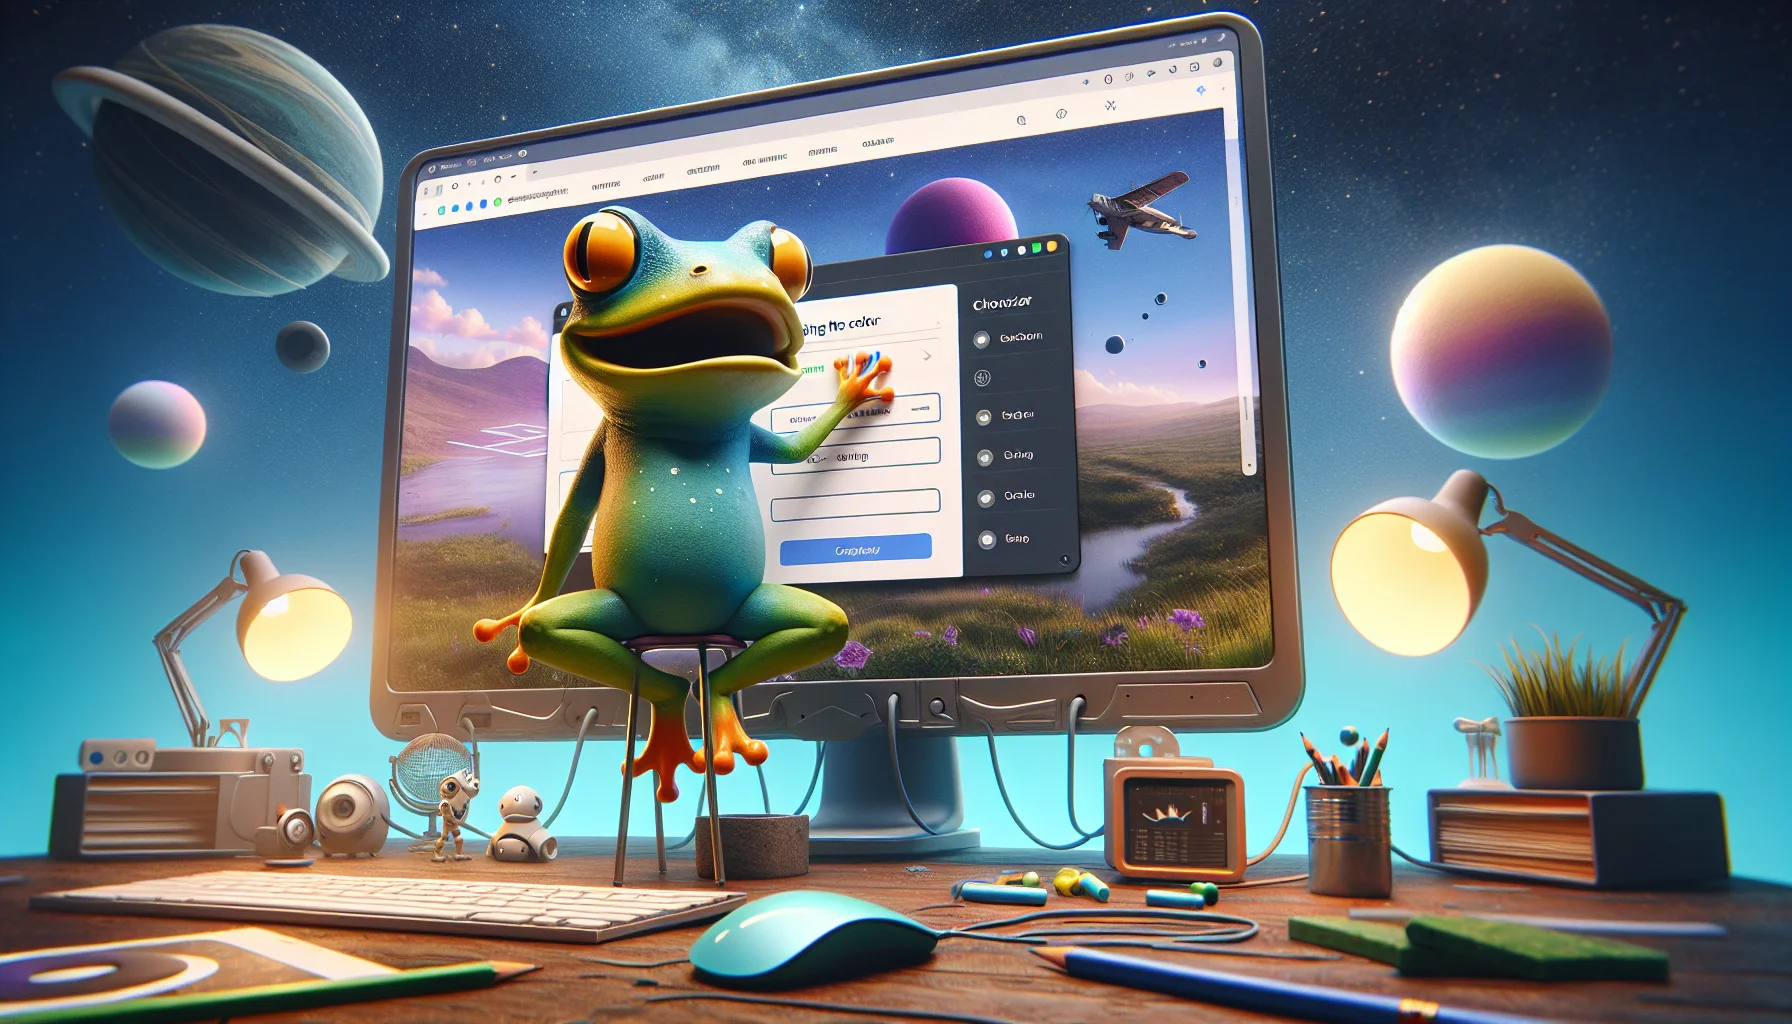 Create a playful and enticing image that depicts a scenario related to web hosting. In the scene, a humorous character, perhaps a sprightly frog, is using a huge virtual reality interface. The frog is changing the color of a button on a website that's hosted on Squarespace. The website looks professionally designed yet retains a touch of whimsy, reflecting the fusion of functionality and design on the platform. Highlight the humor and charm in the frog's endeavor to customize the site by changing the button color, creating a delightful image that draws attention to the flexibility Squarespace offers.